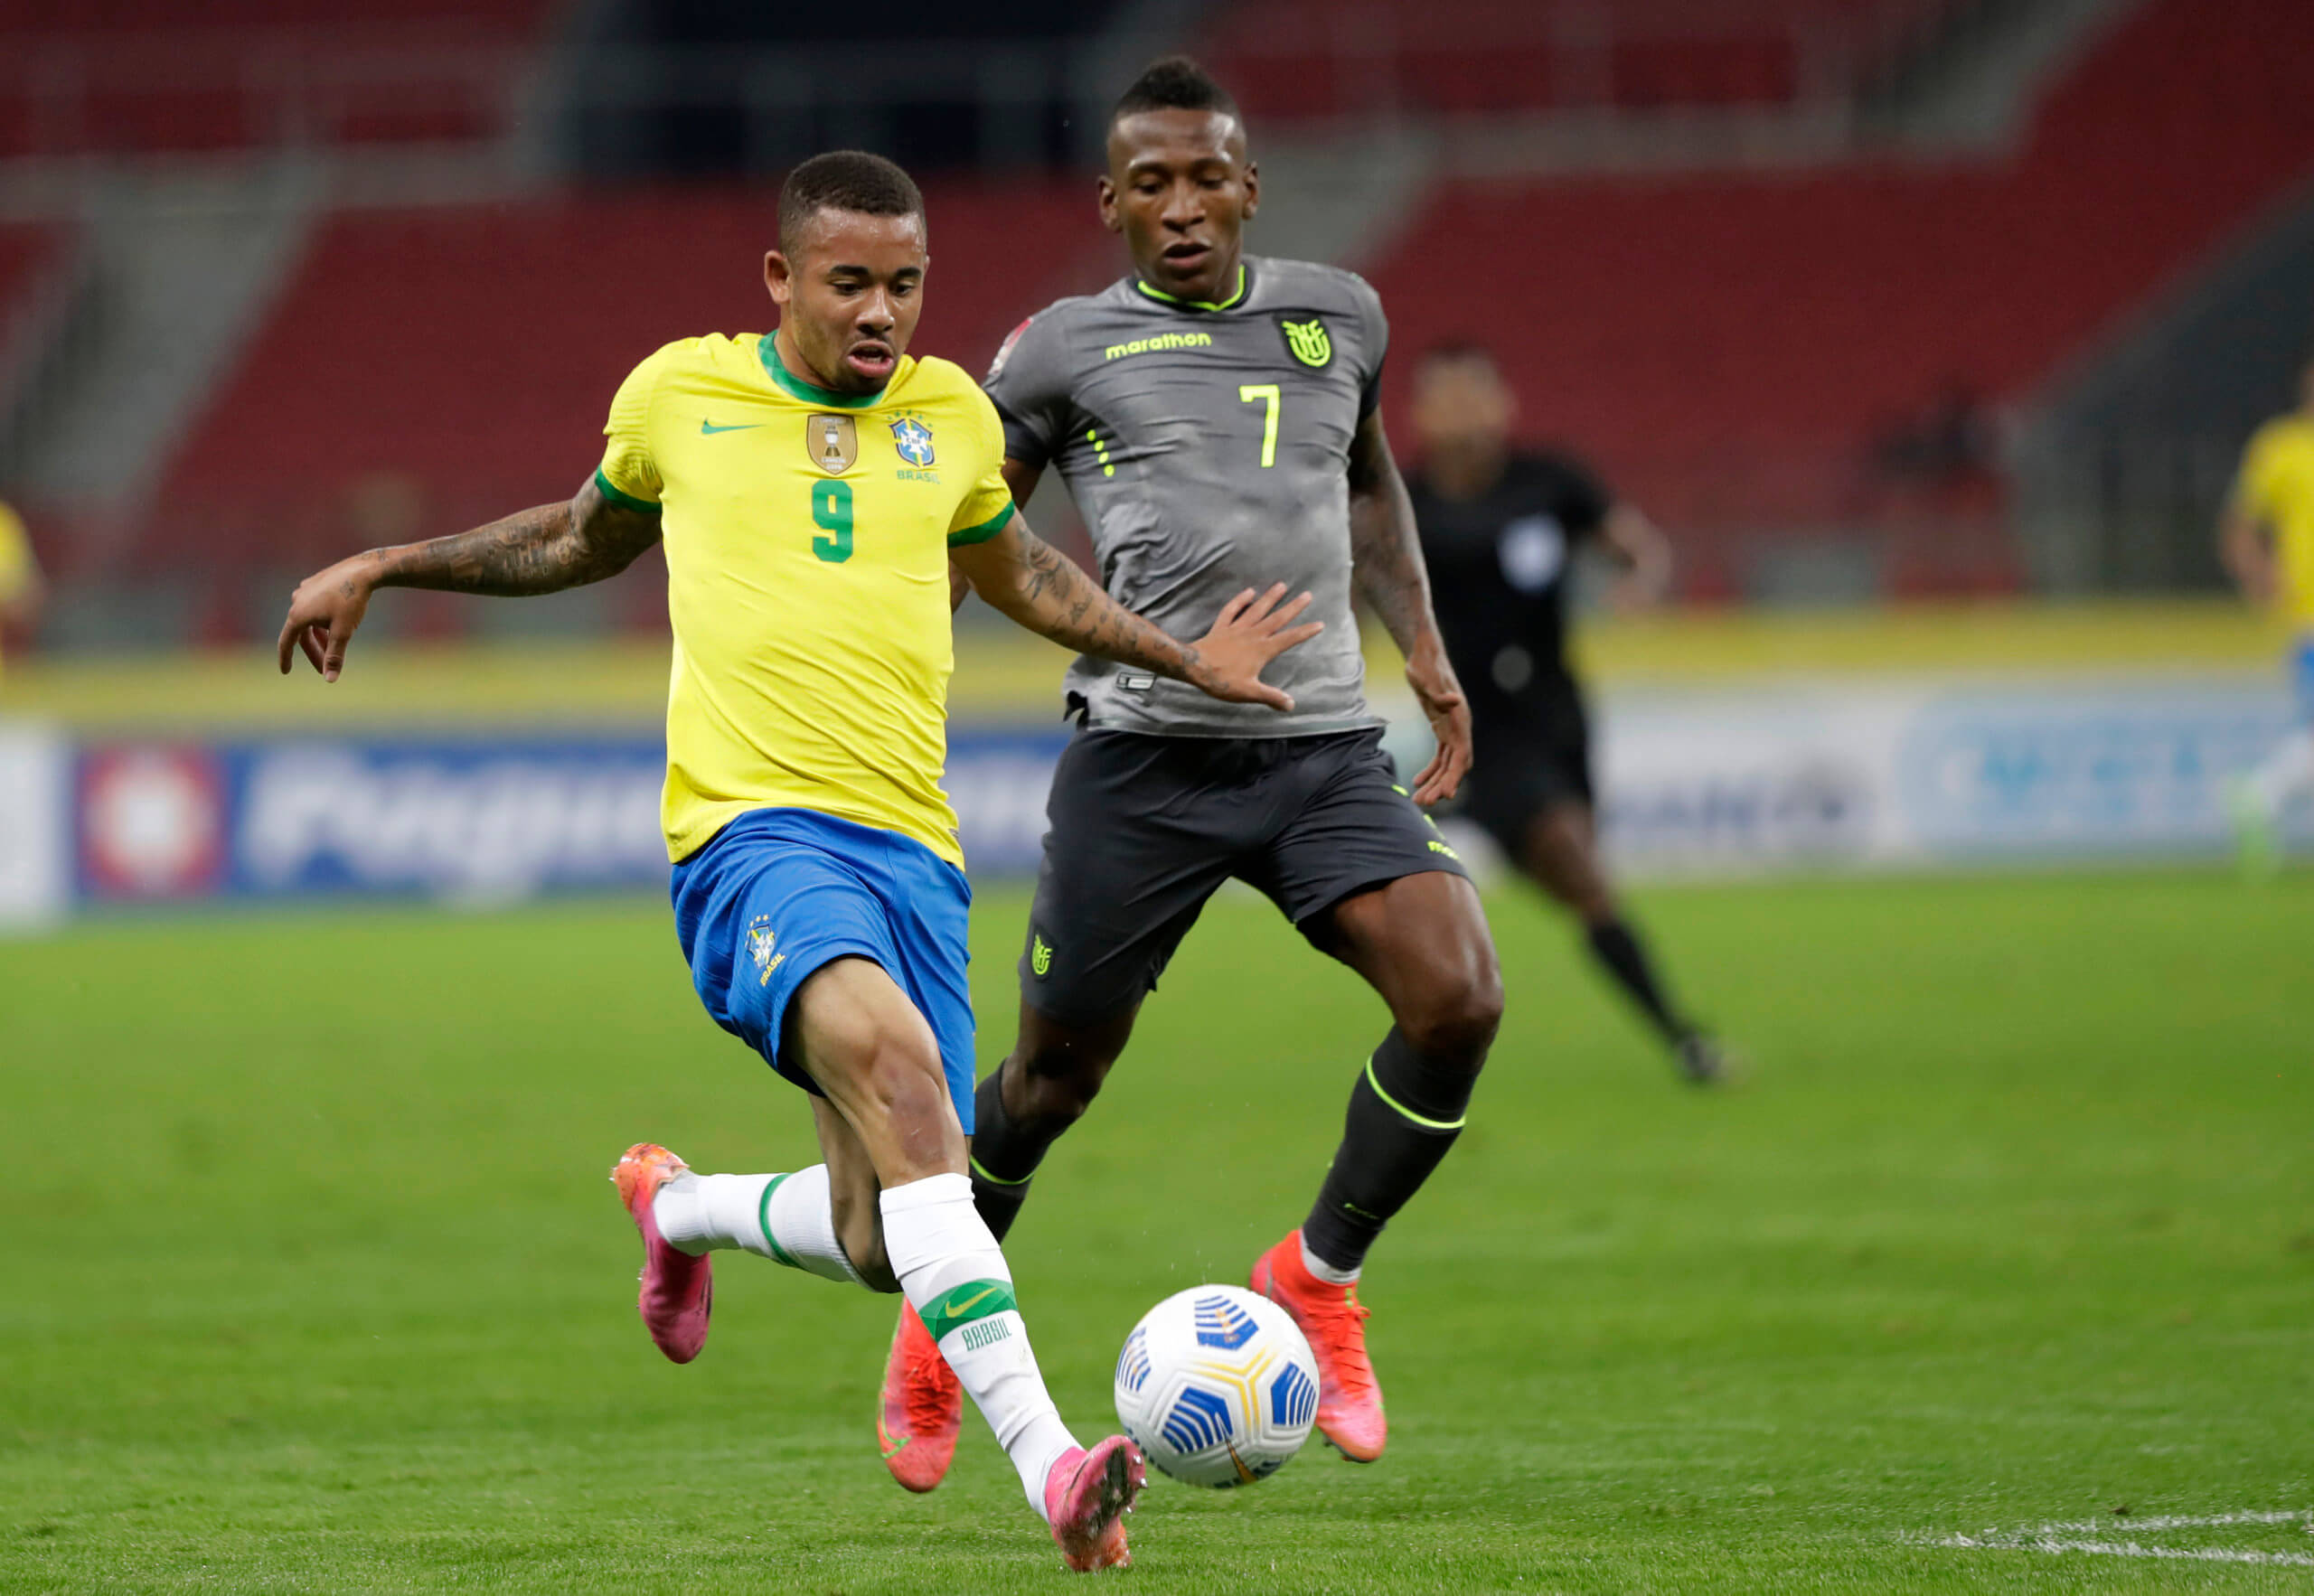 World Cup Group G Guide: Brazil expected to shine after favourable draw